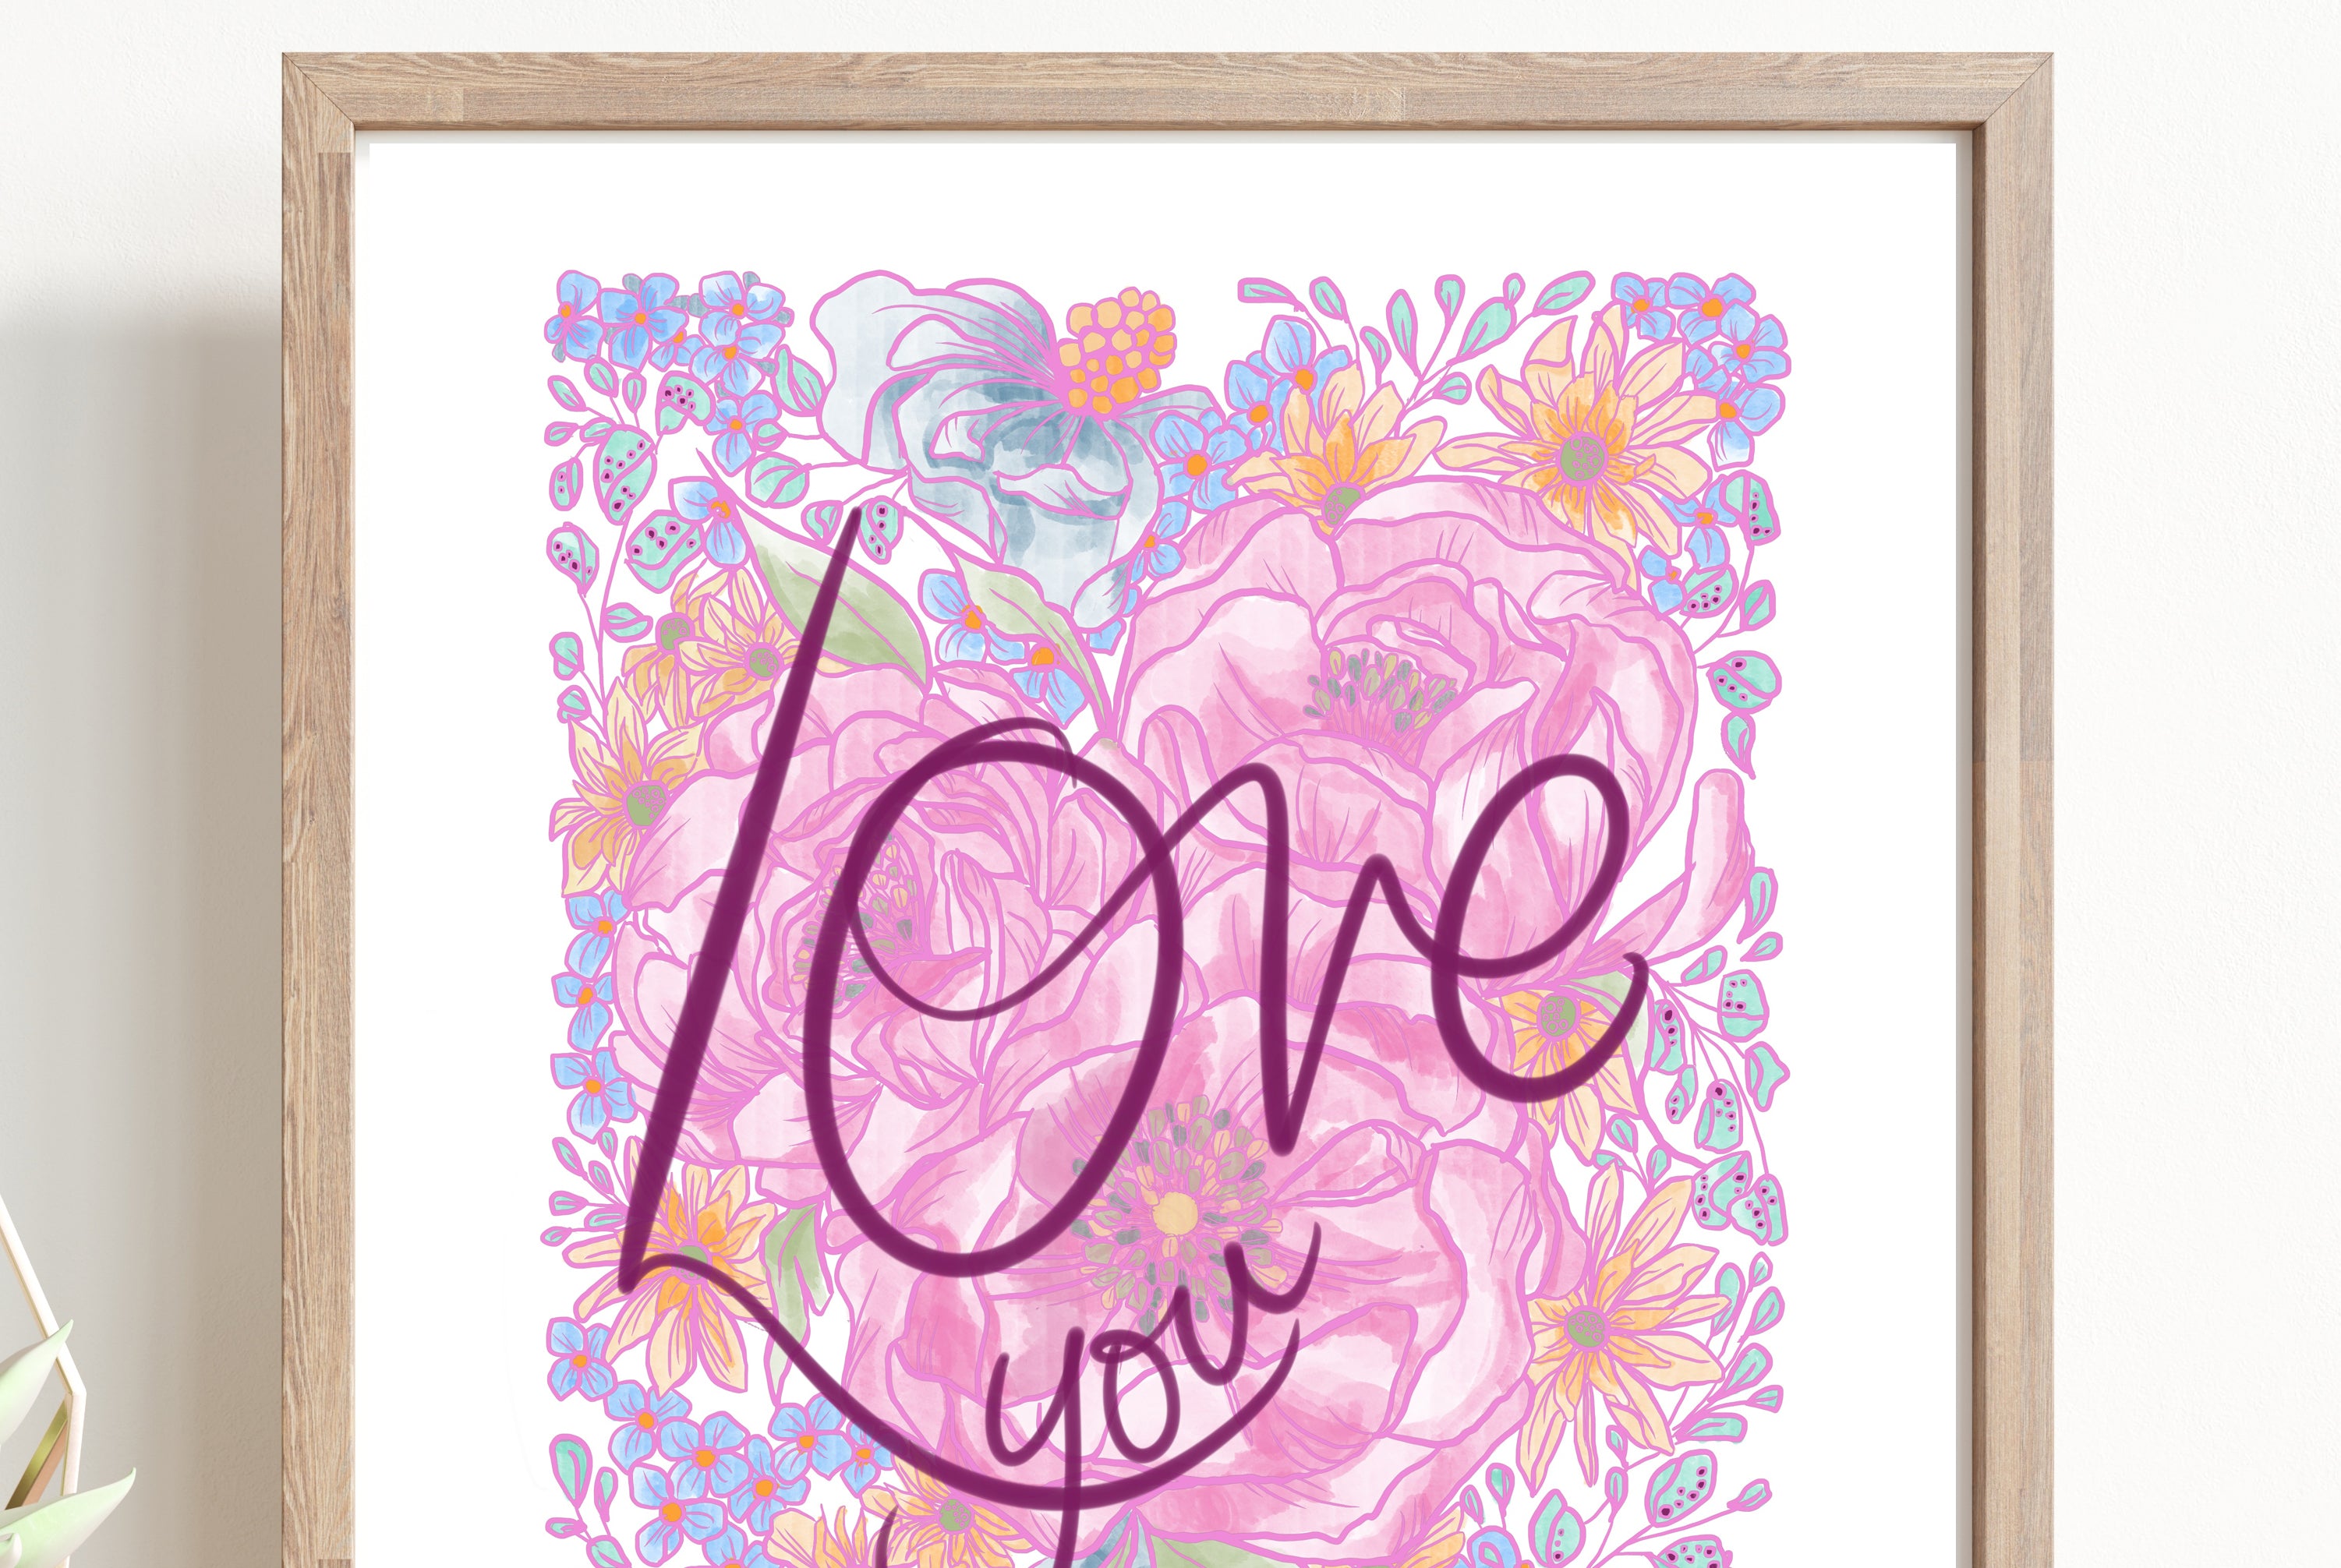 Love you  - Self love -  illustrated by hand flowers print